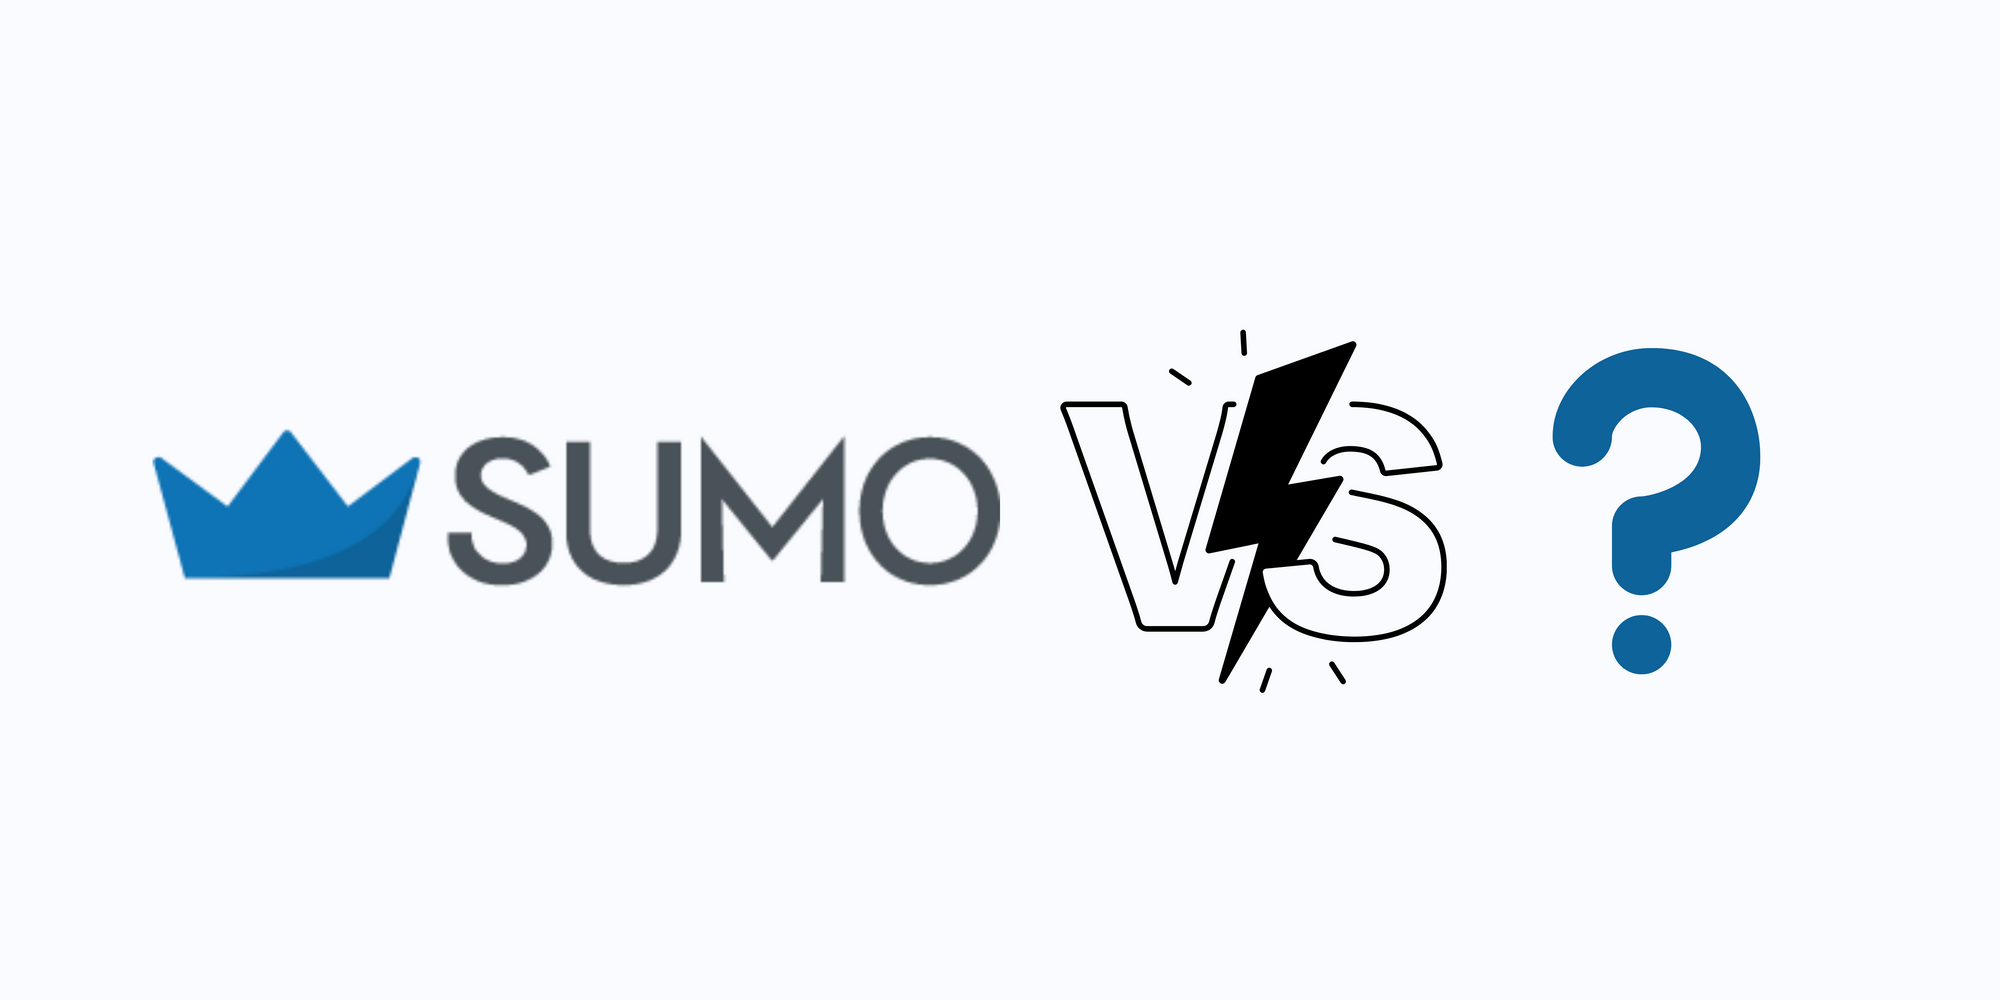 Sumo icon, versus symbol and a question mark to mention the alternatives on blue background